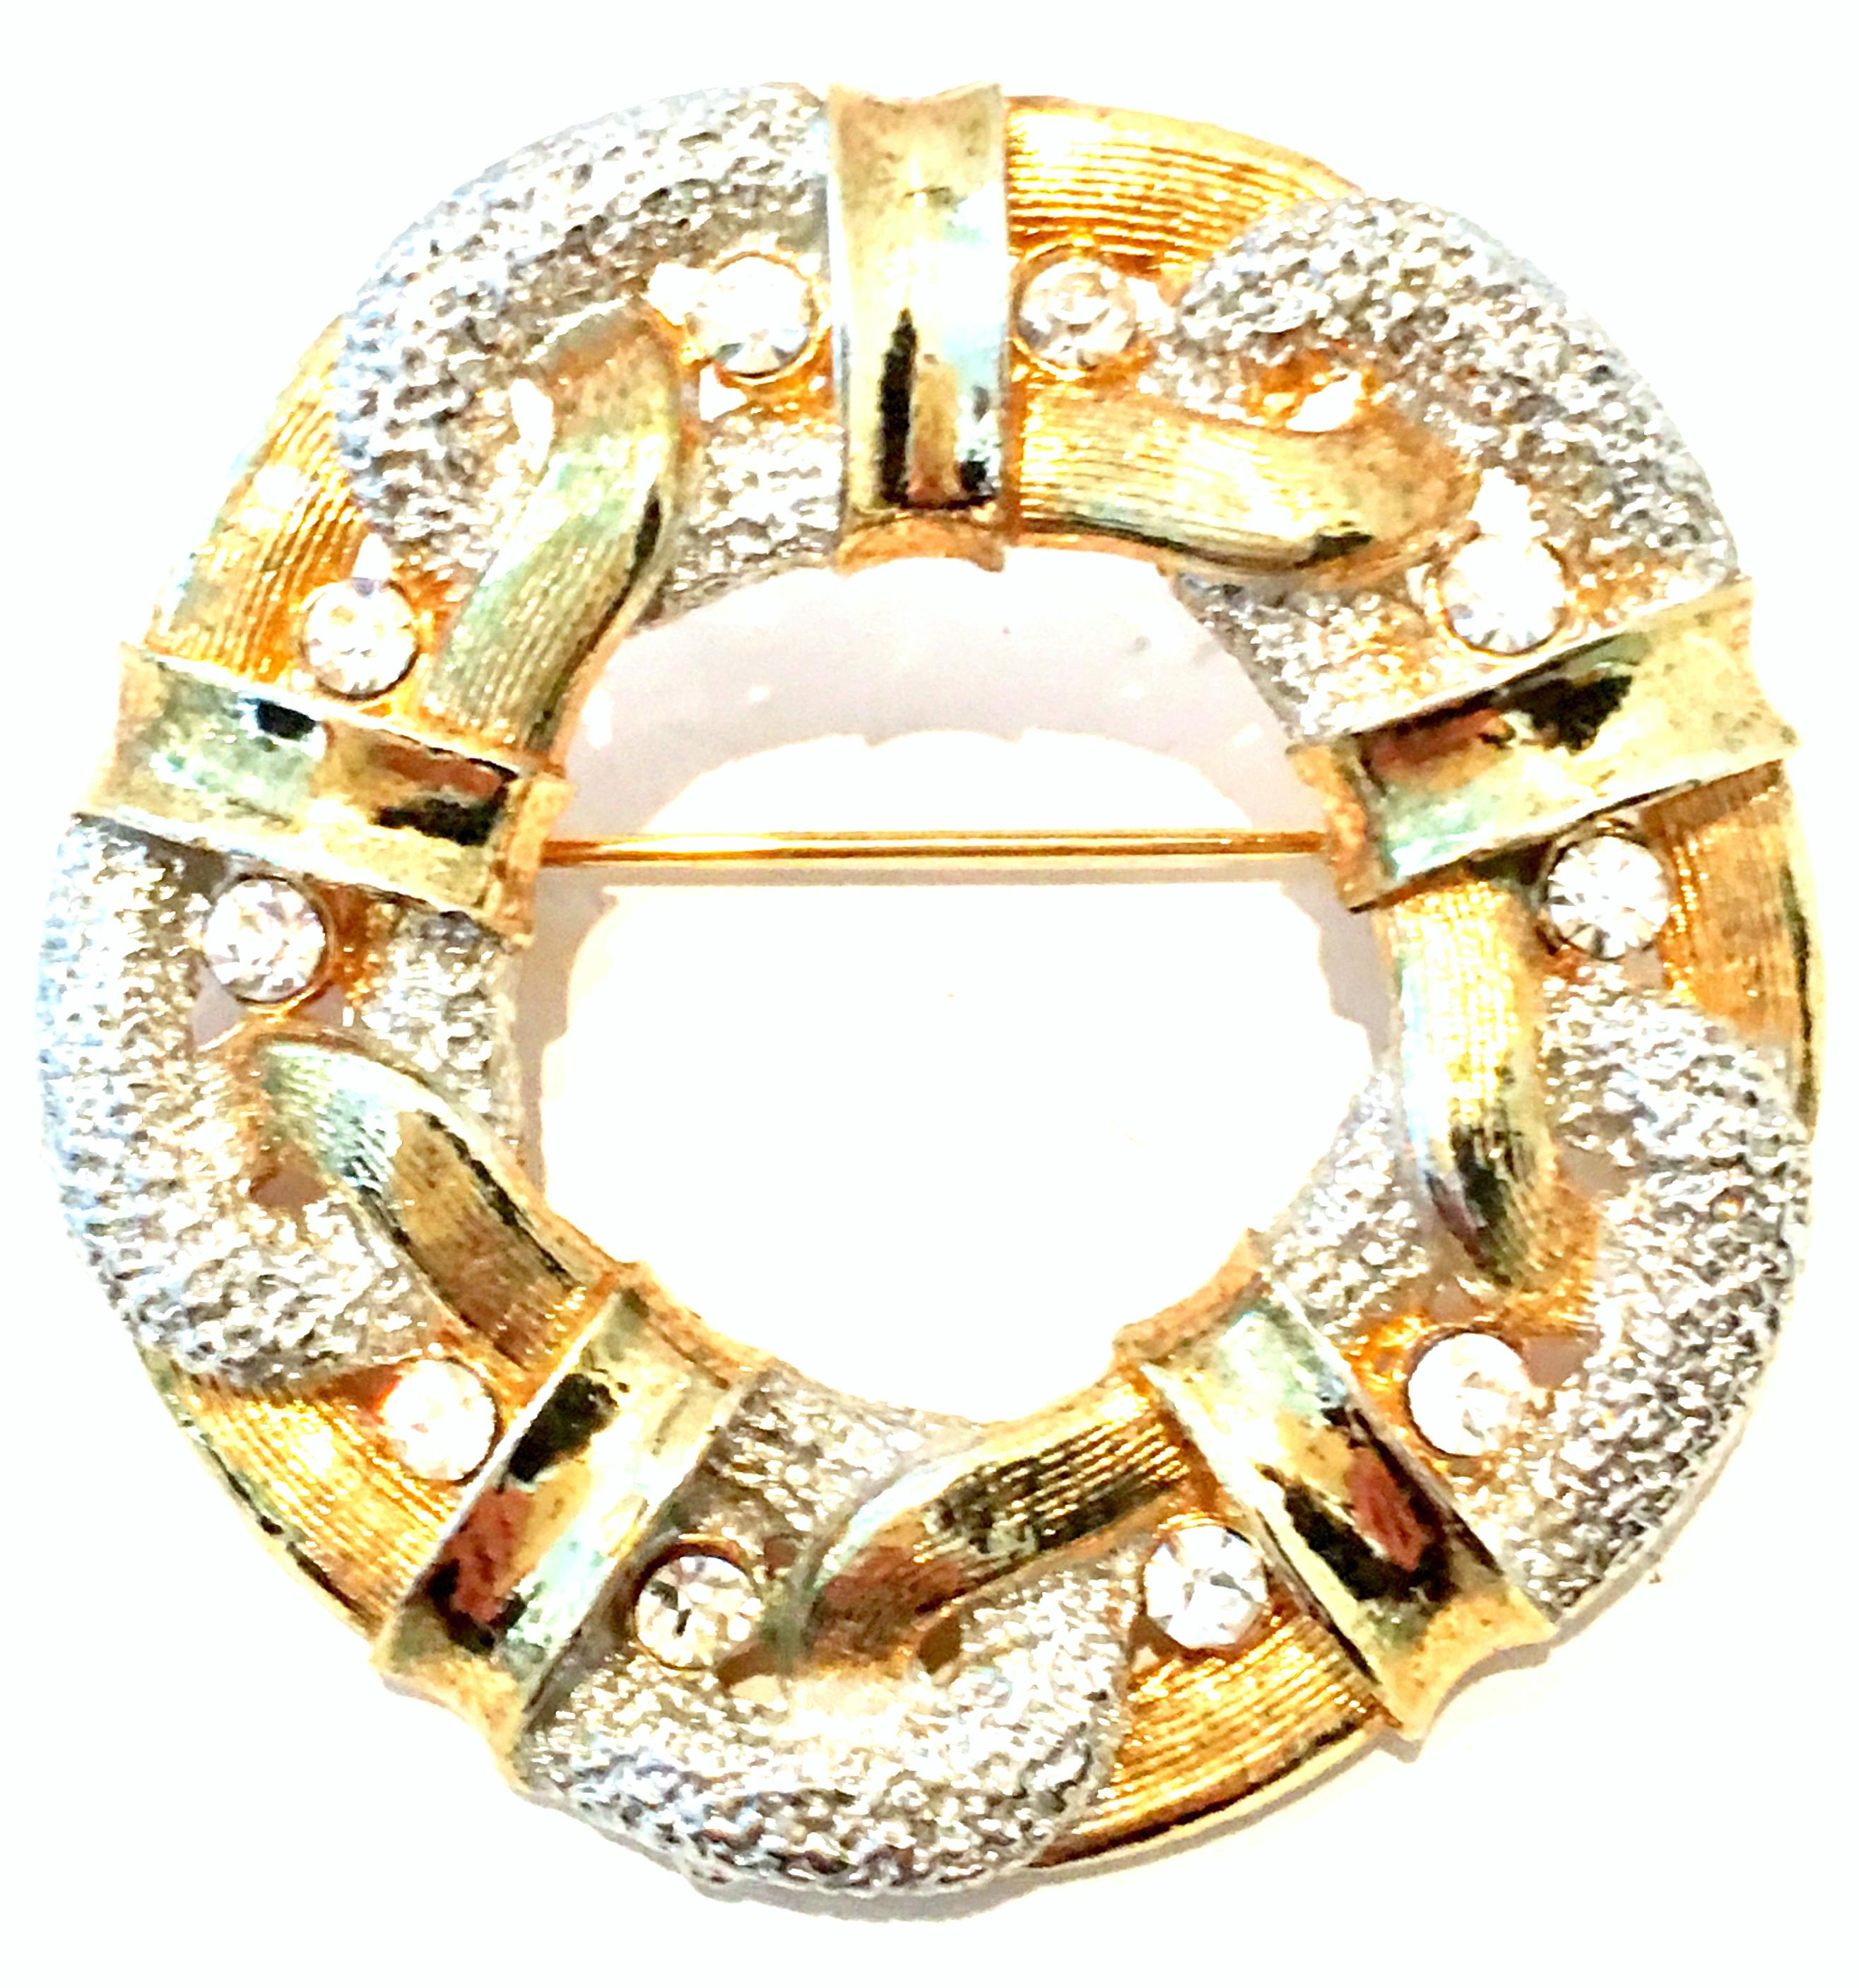 20th Century Gold Plate & Austrian Crystal Dimensional Brooch. This finely crafted dimensional brooch features gold plate metal, raised ribbon like detail with pave set brilliant colorless Austrian crystal stones.